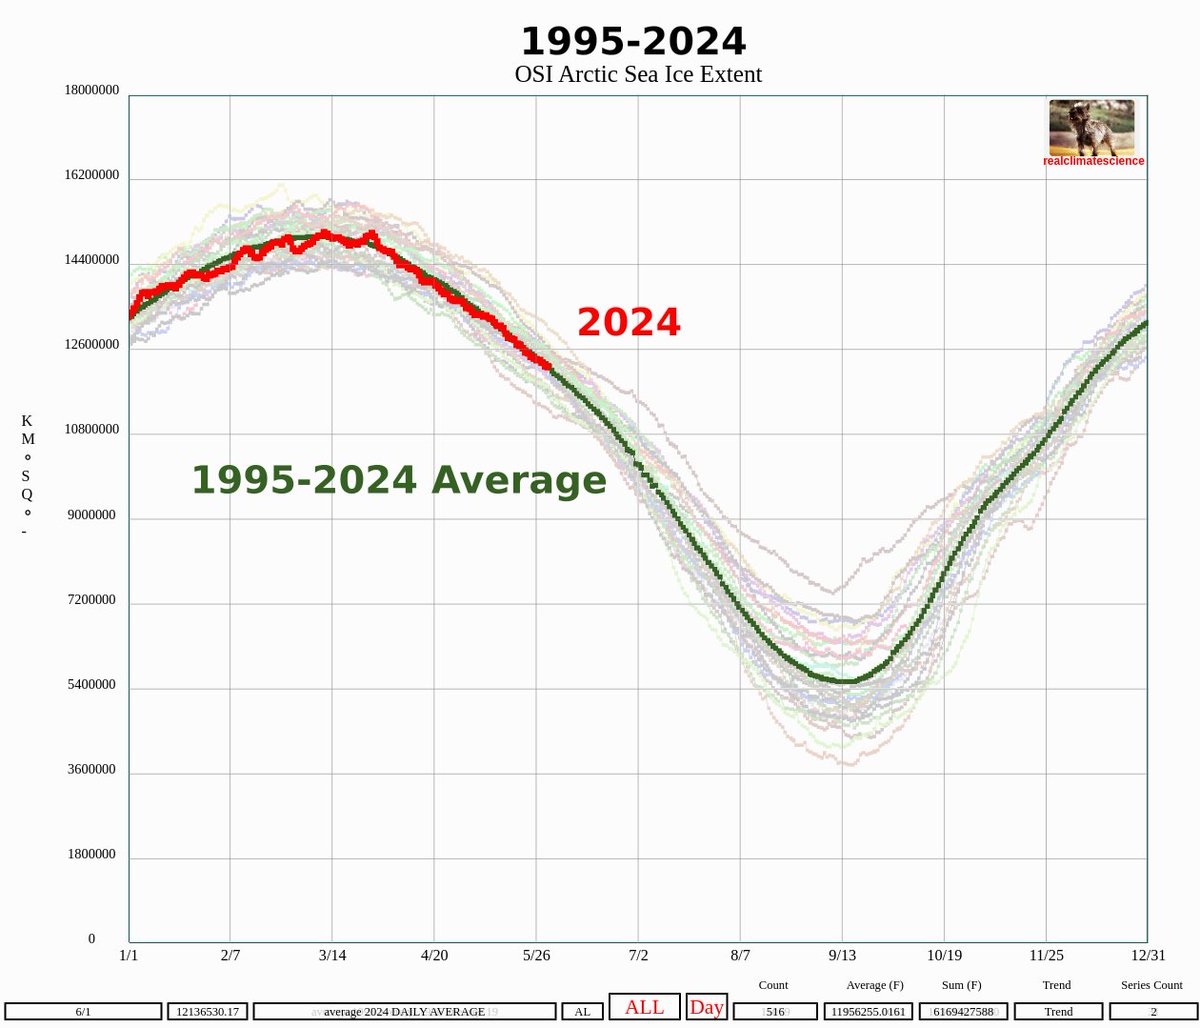 Arctic sea ice extent is tracking right at the 1995-2024 average. The Arctic melting scam is dead, but government scientists and the press will continue to lie about it for as long it is profitable. #ClimateScam